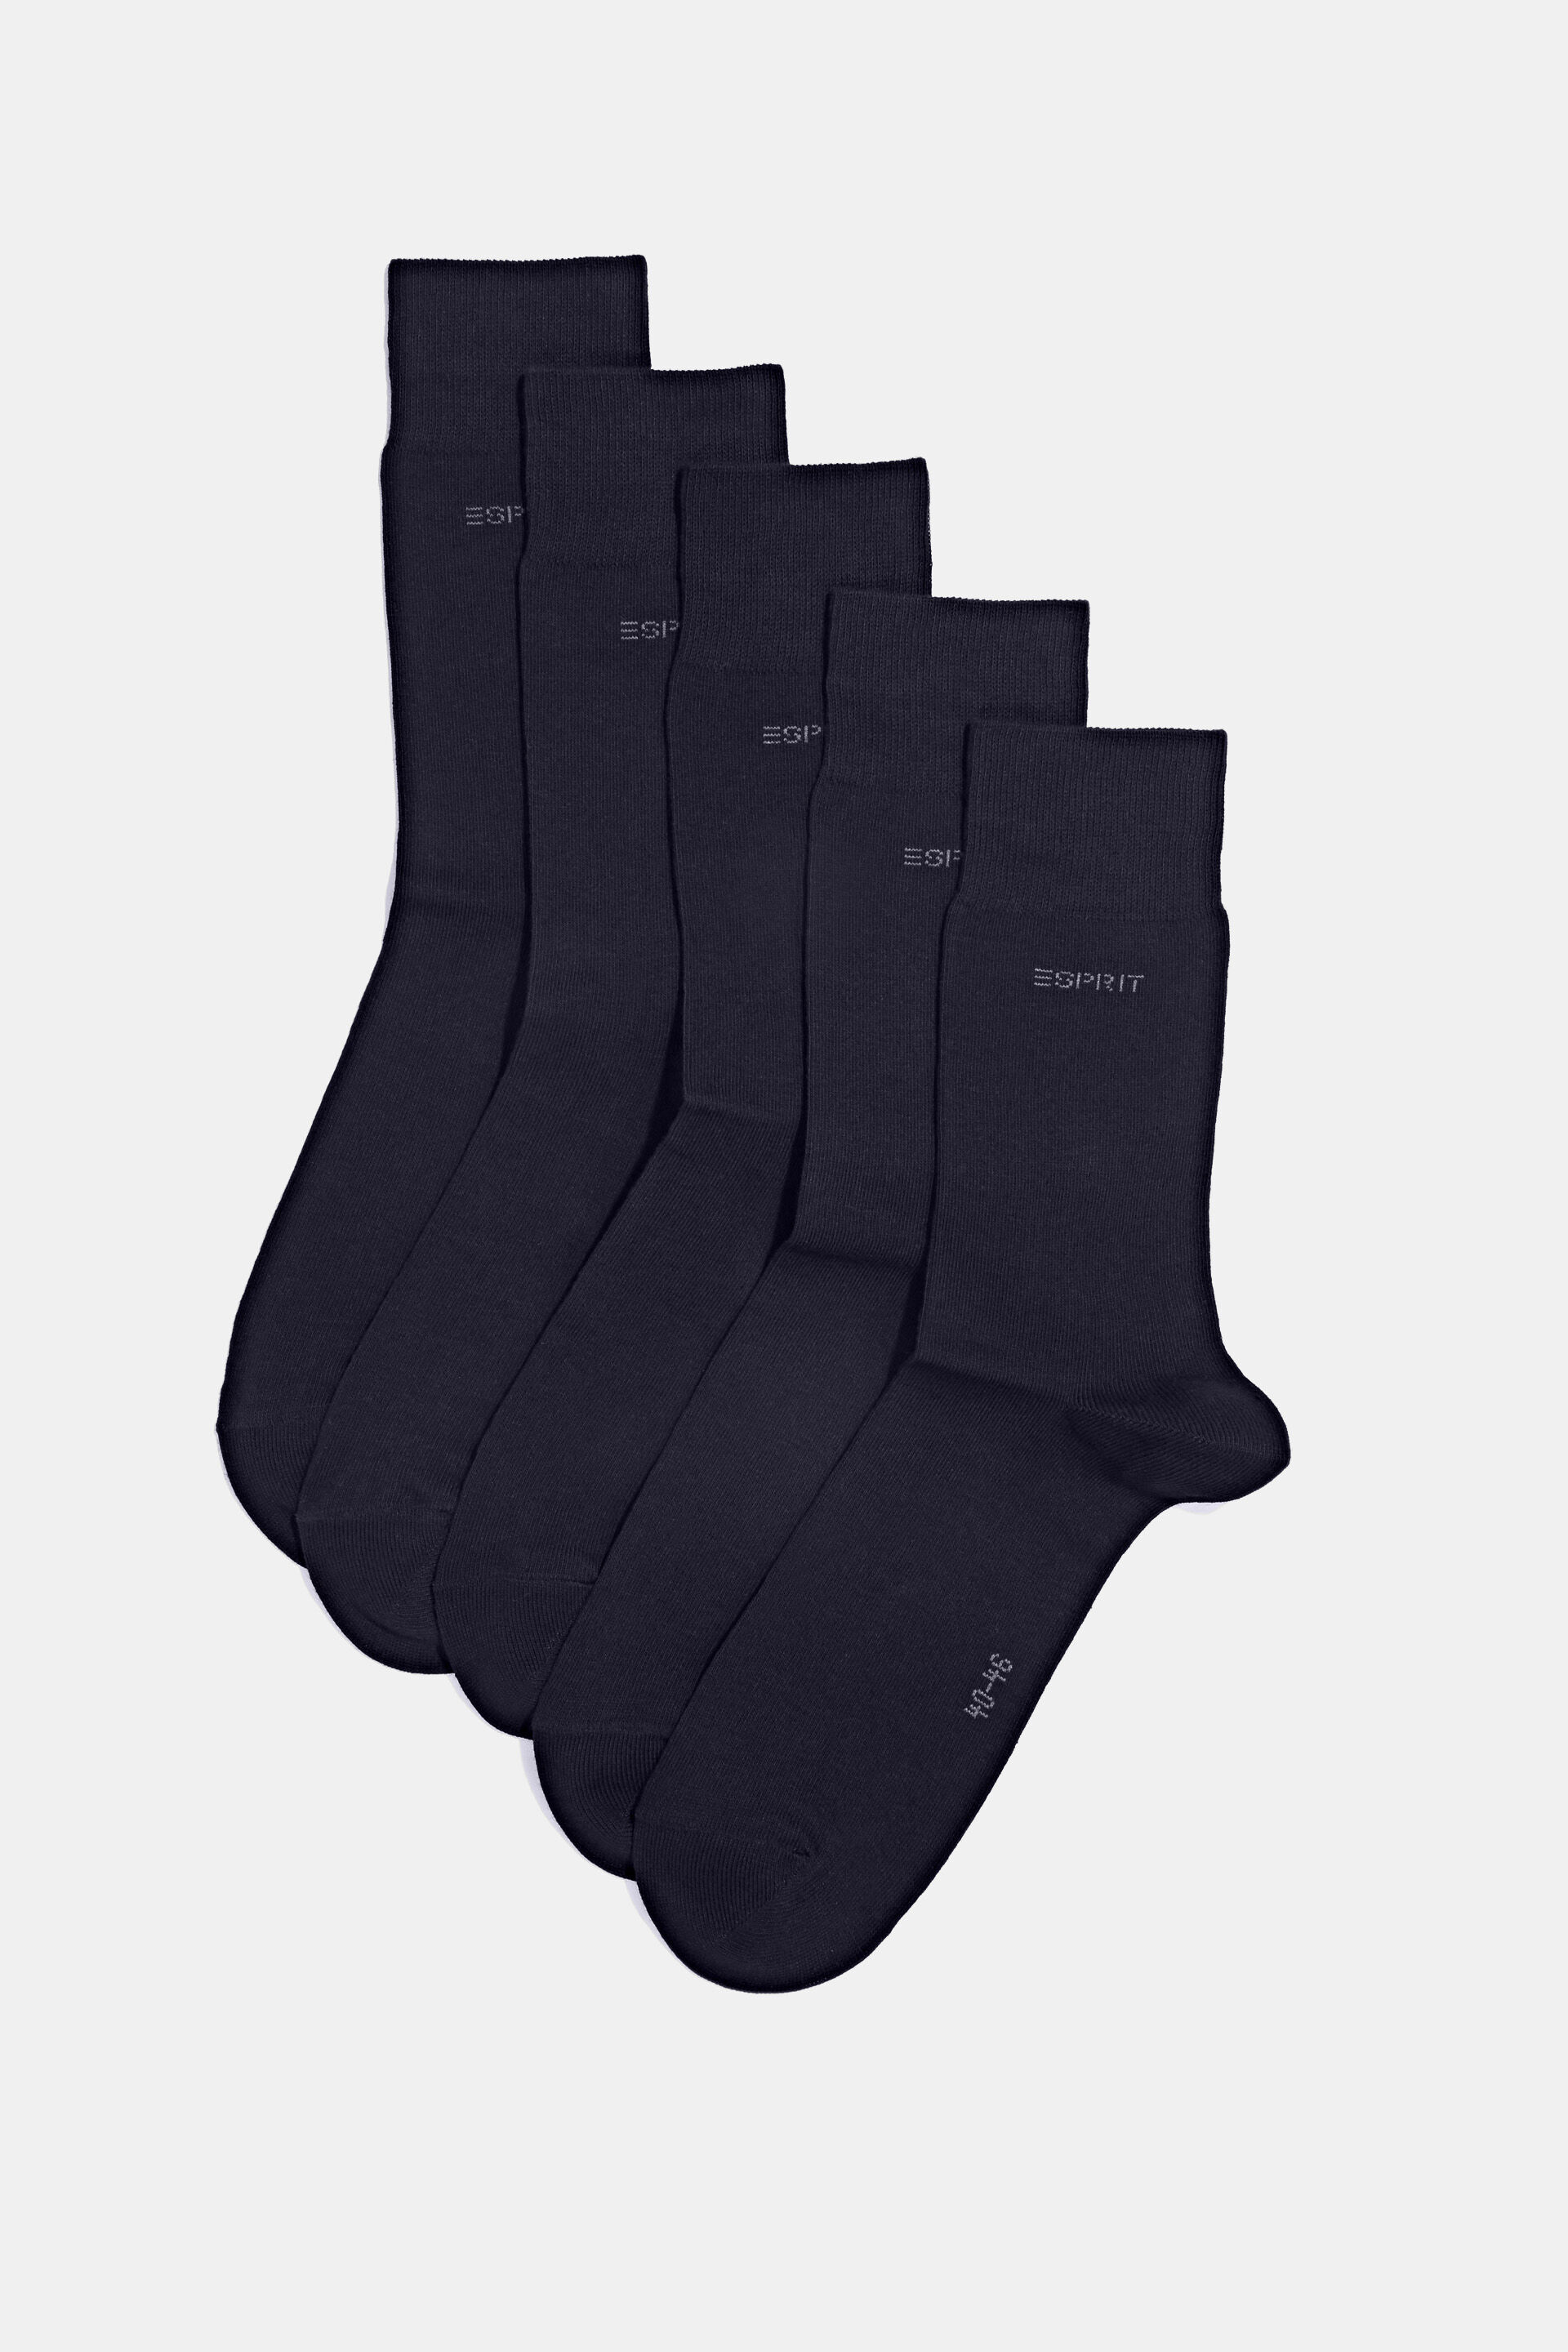 ESPRIT Unisex Kids Foot Logo 2-Pack Socks Cotton Black Grey More Colours Thin Colourful Calf Socks For Boys Or Girls Plain For Summer Or Winter Ideal For School Multipack 2 Pairs